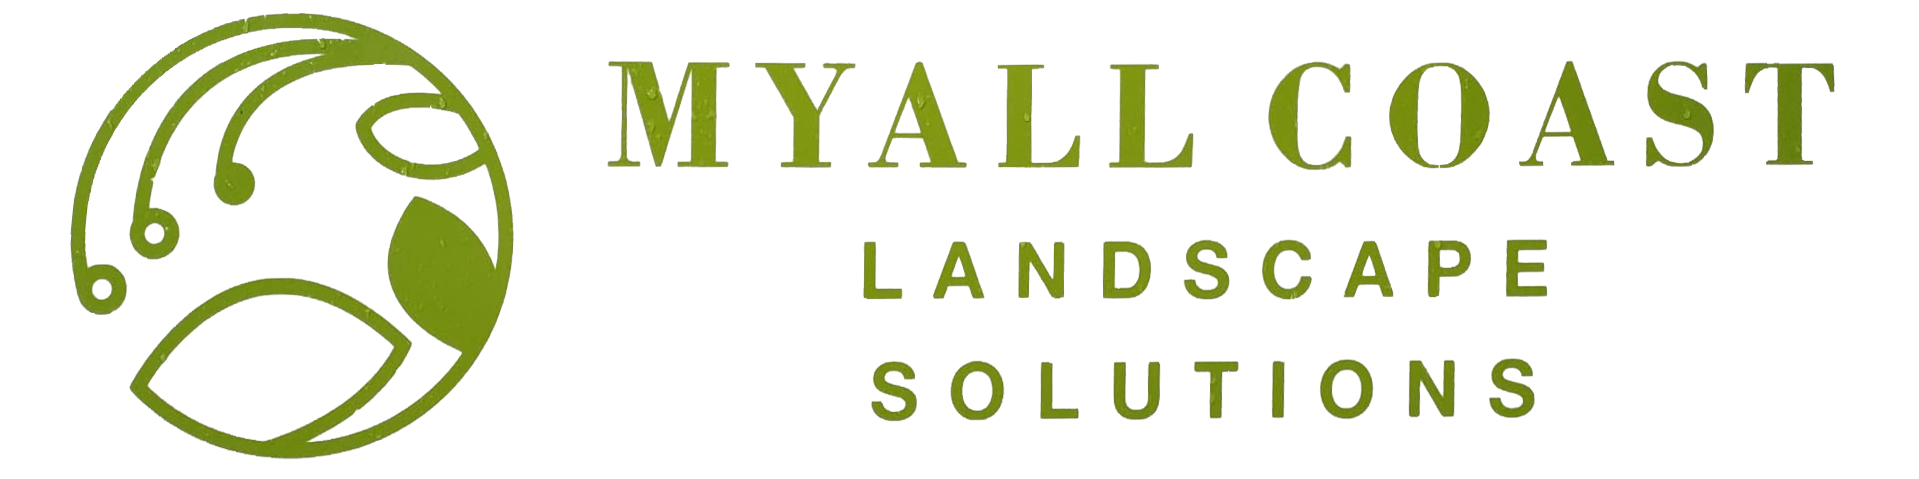 Myall Coast Landscape Solutions